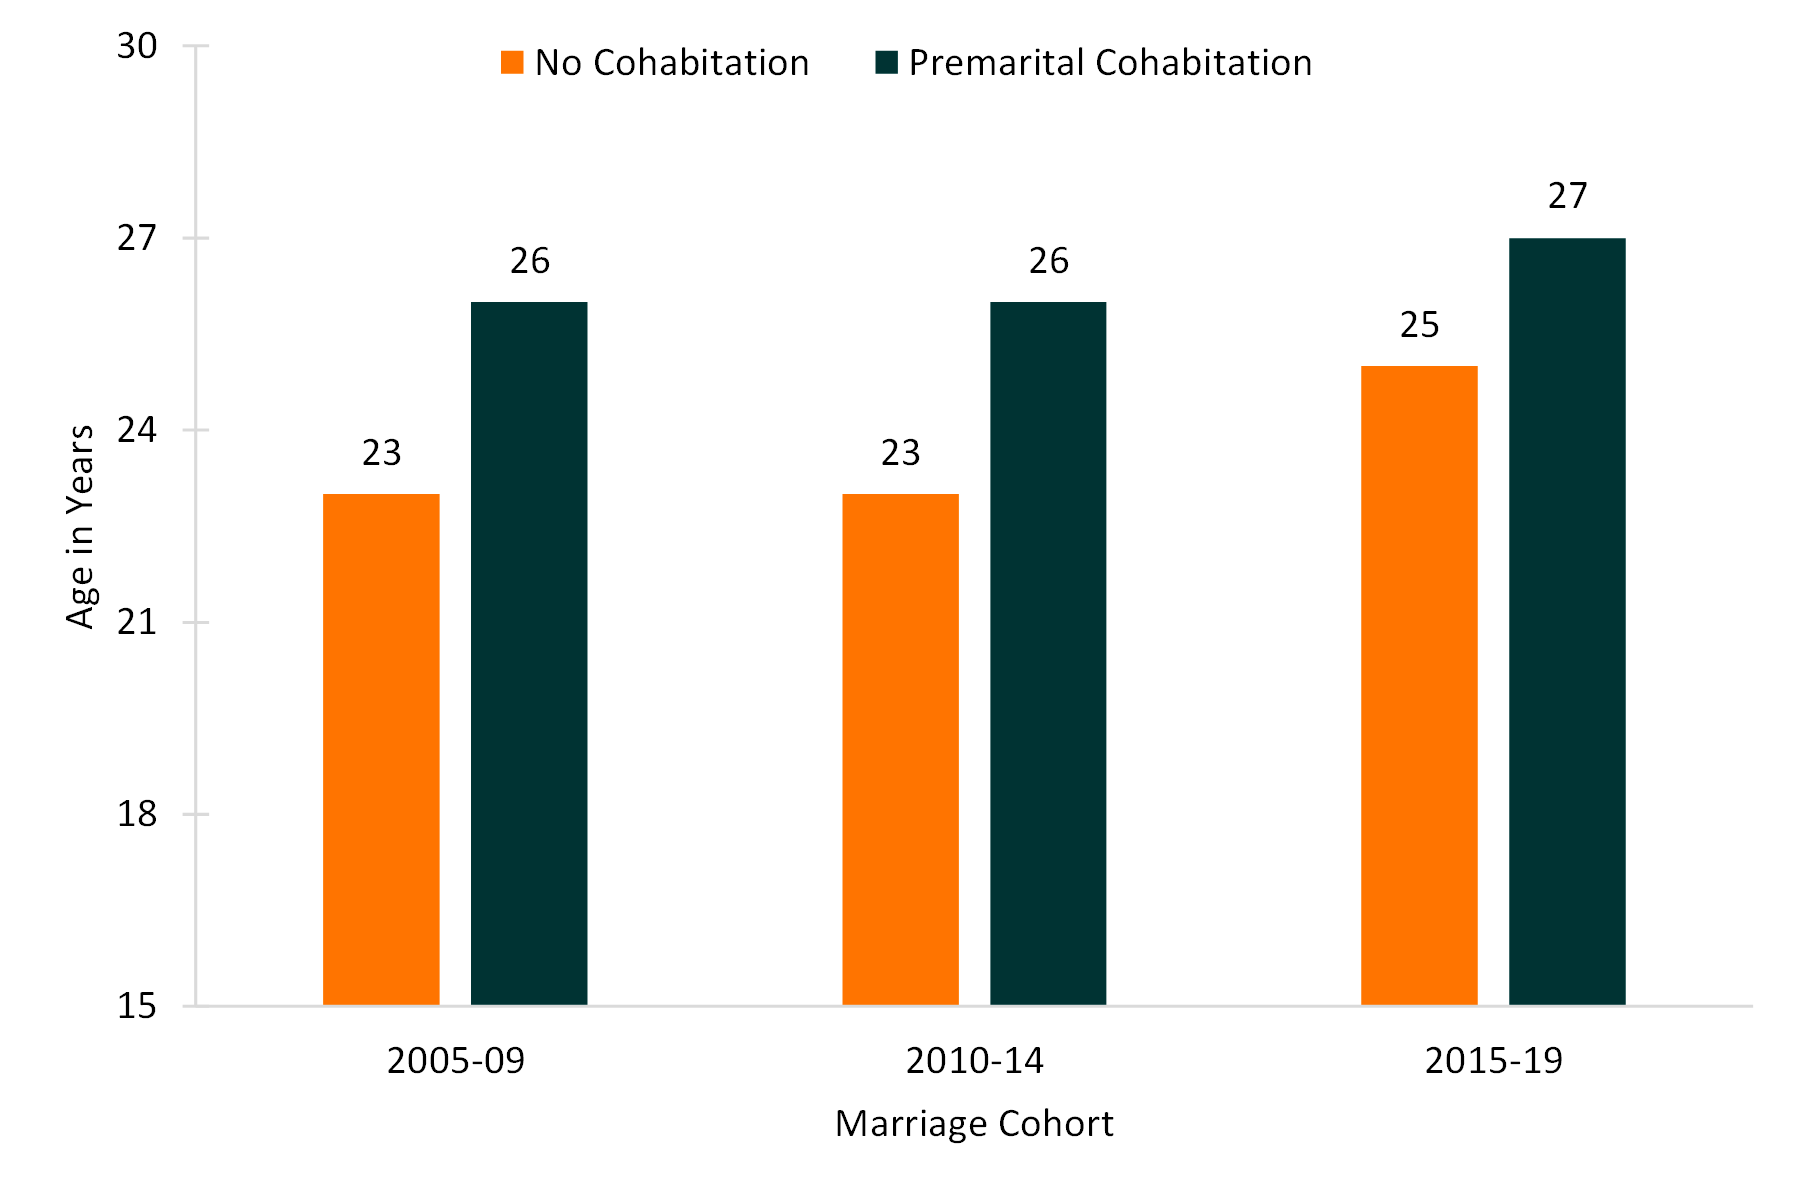 2-color bar chart showing Figure 3. Median Age at Marriage by Premarital Cohabitation Status for Marriage Cohort